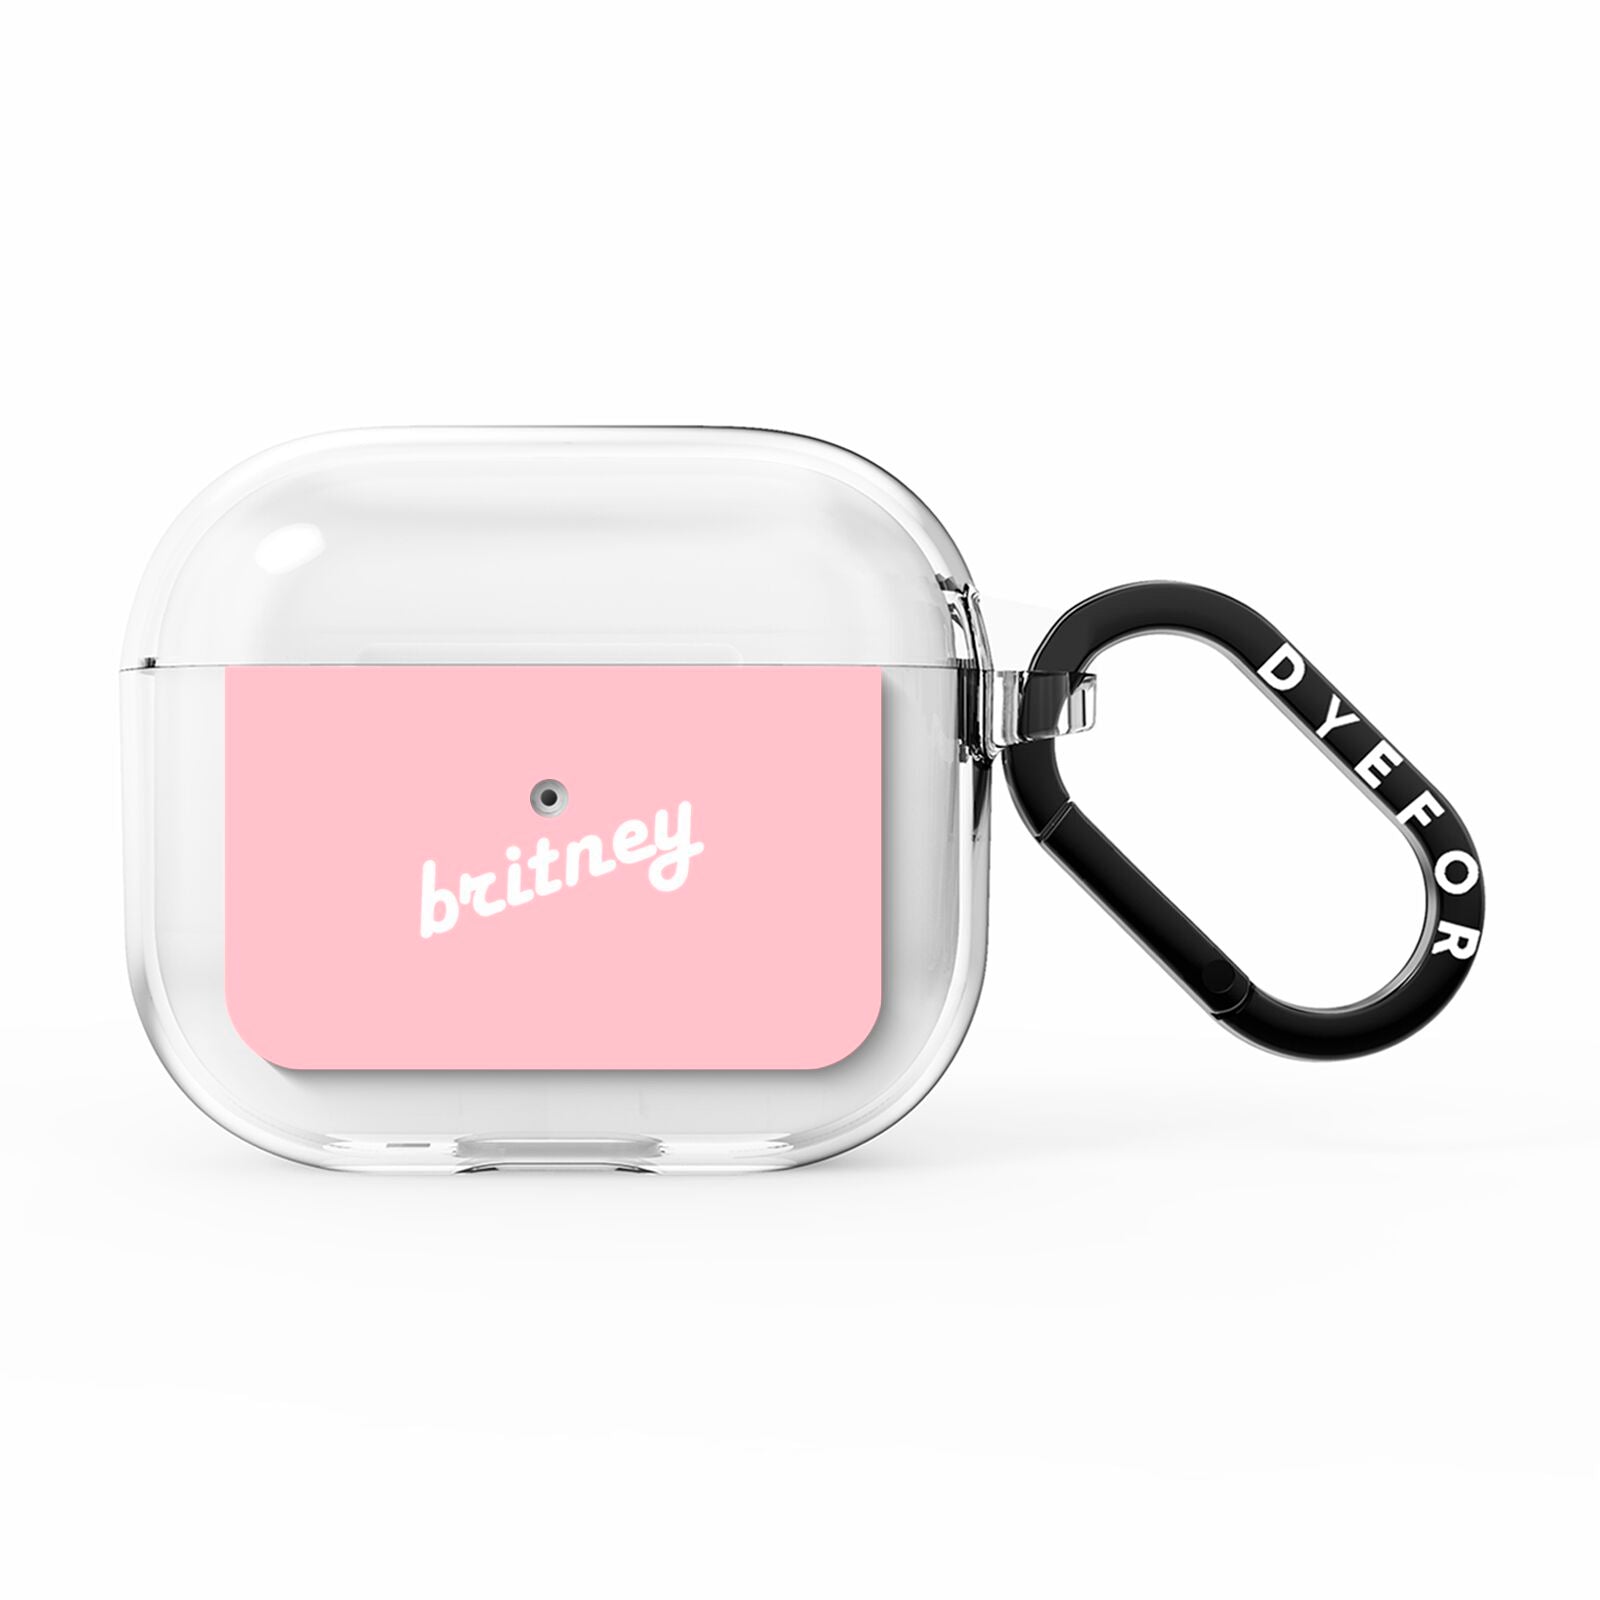 Personalised Pink Name AirPods Clear Case 3rd Gen